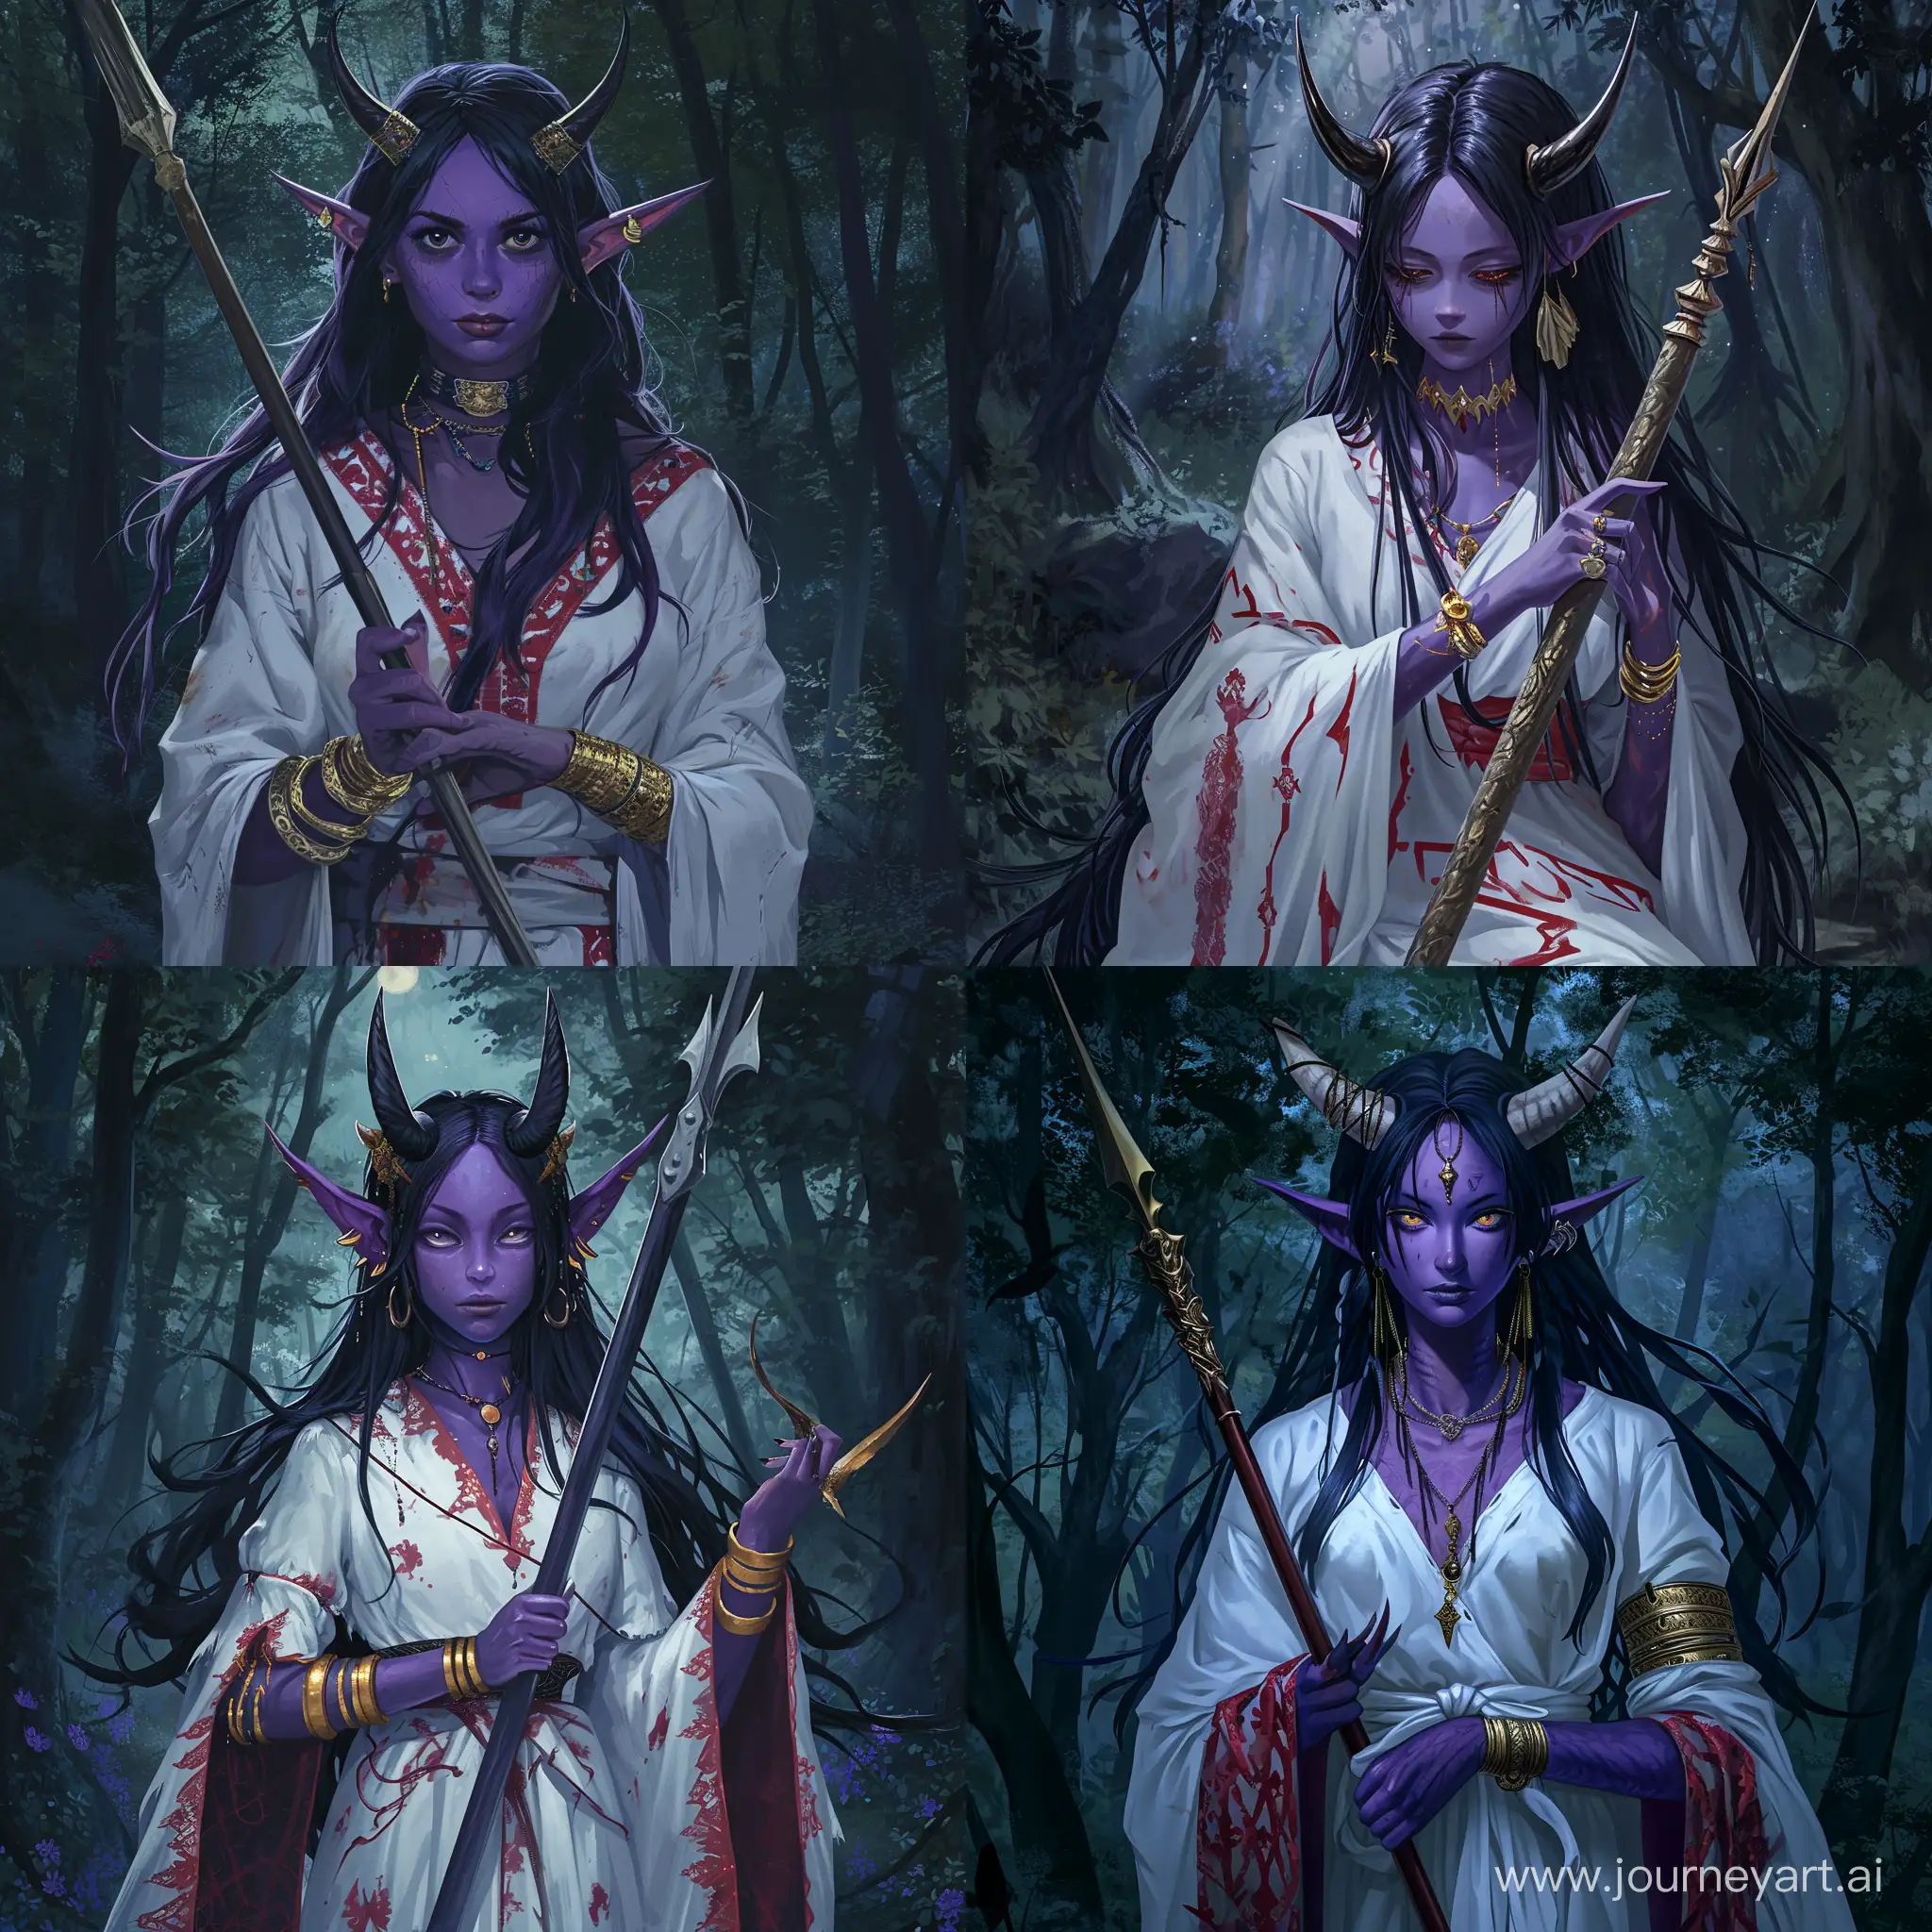 A girl, a demon with purple skin color, with long black hair, sharp horns on her head, gold-plated bracelets on her wrists, dressed in a white robe with red-dark patterns, a night forest background, a spear in her hands